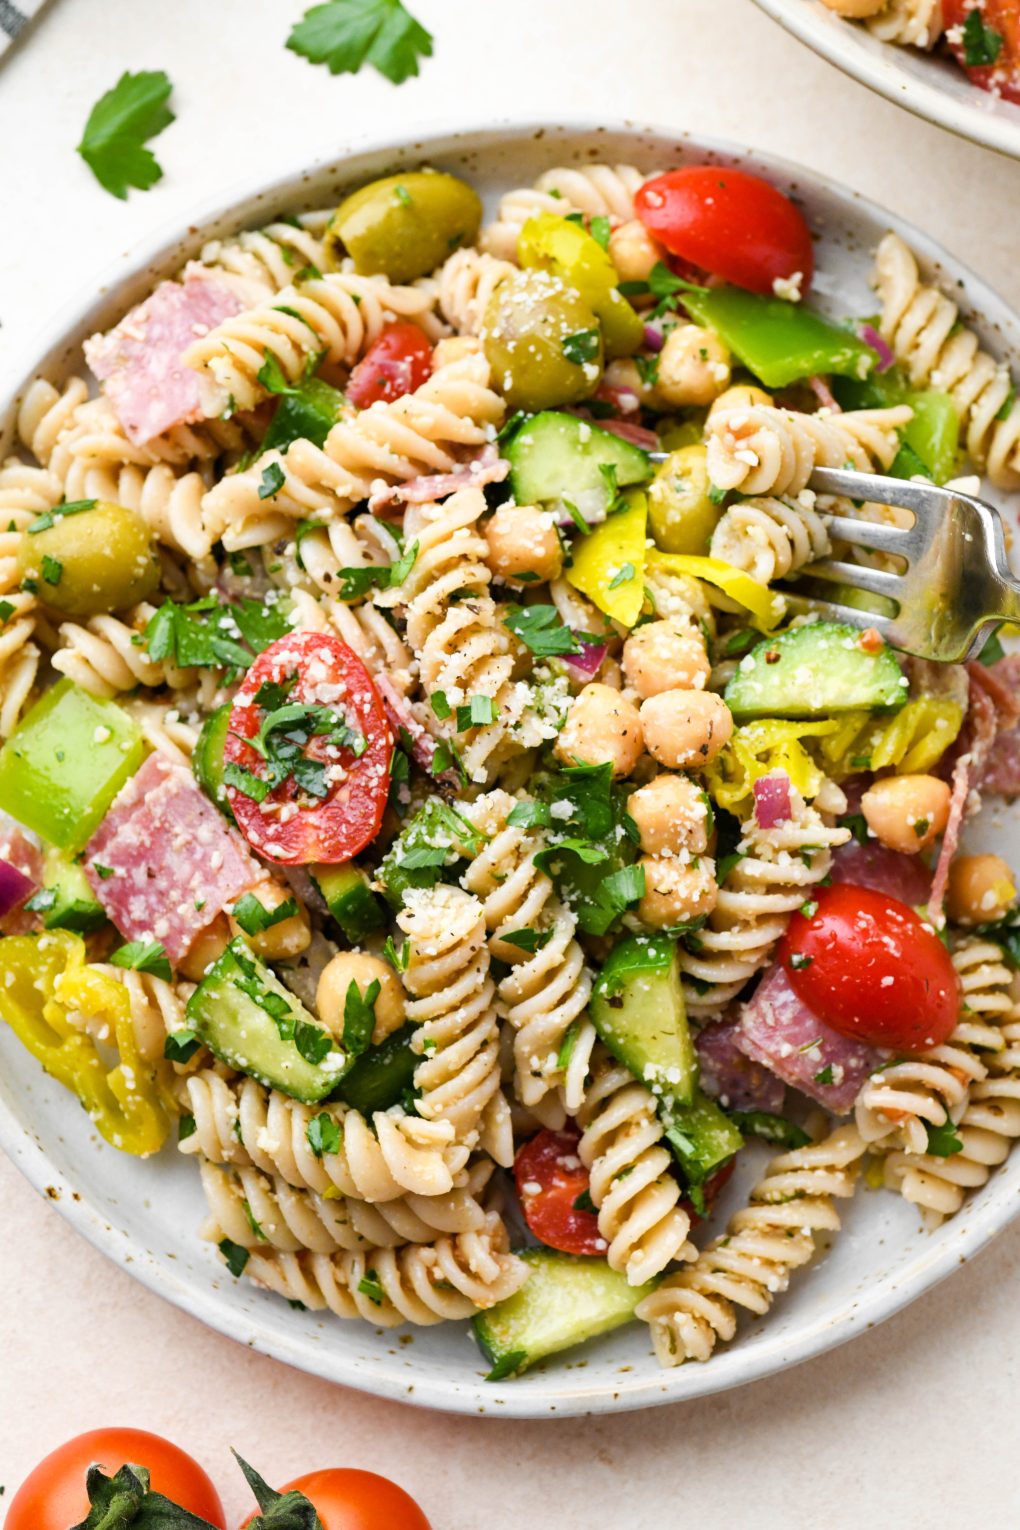 A small plate of Italian pasta salad with a fork digging into take a bite.